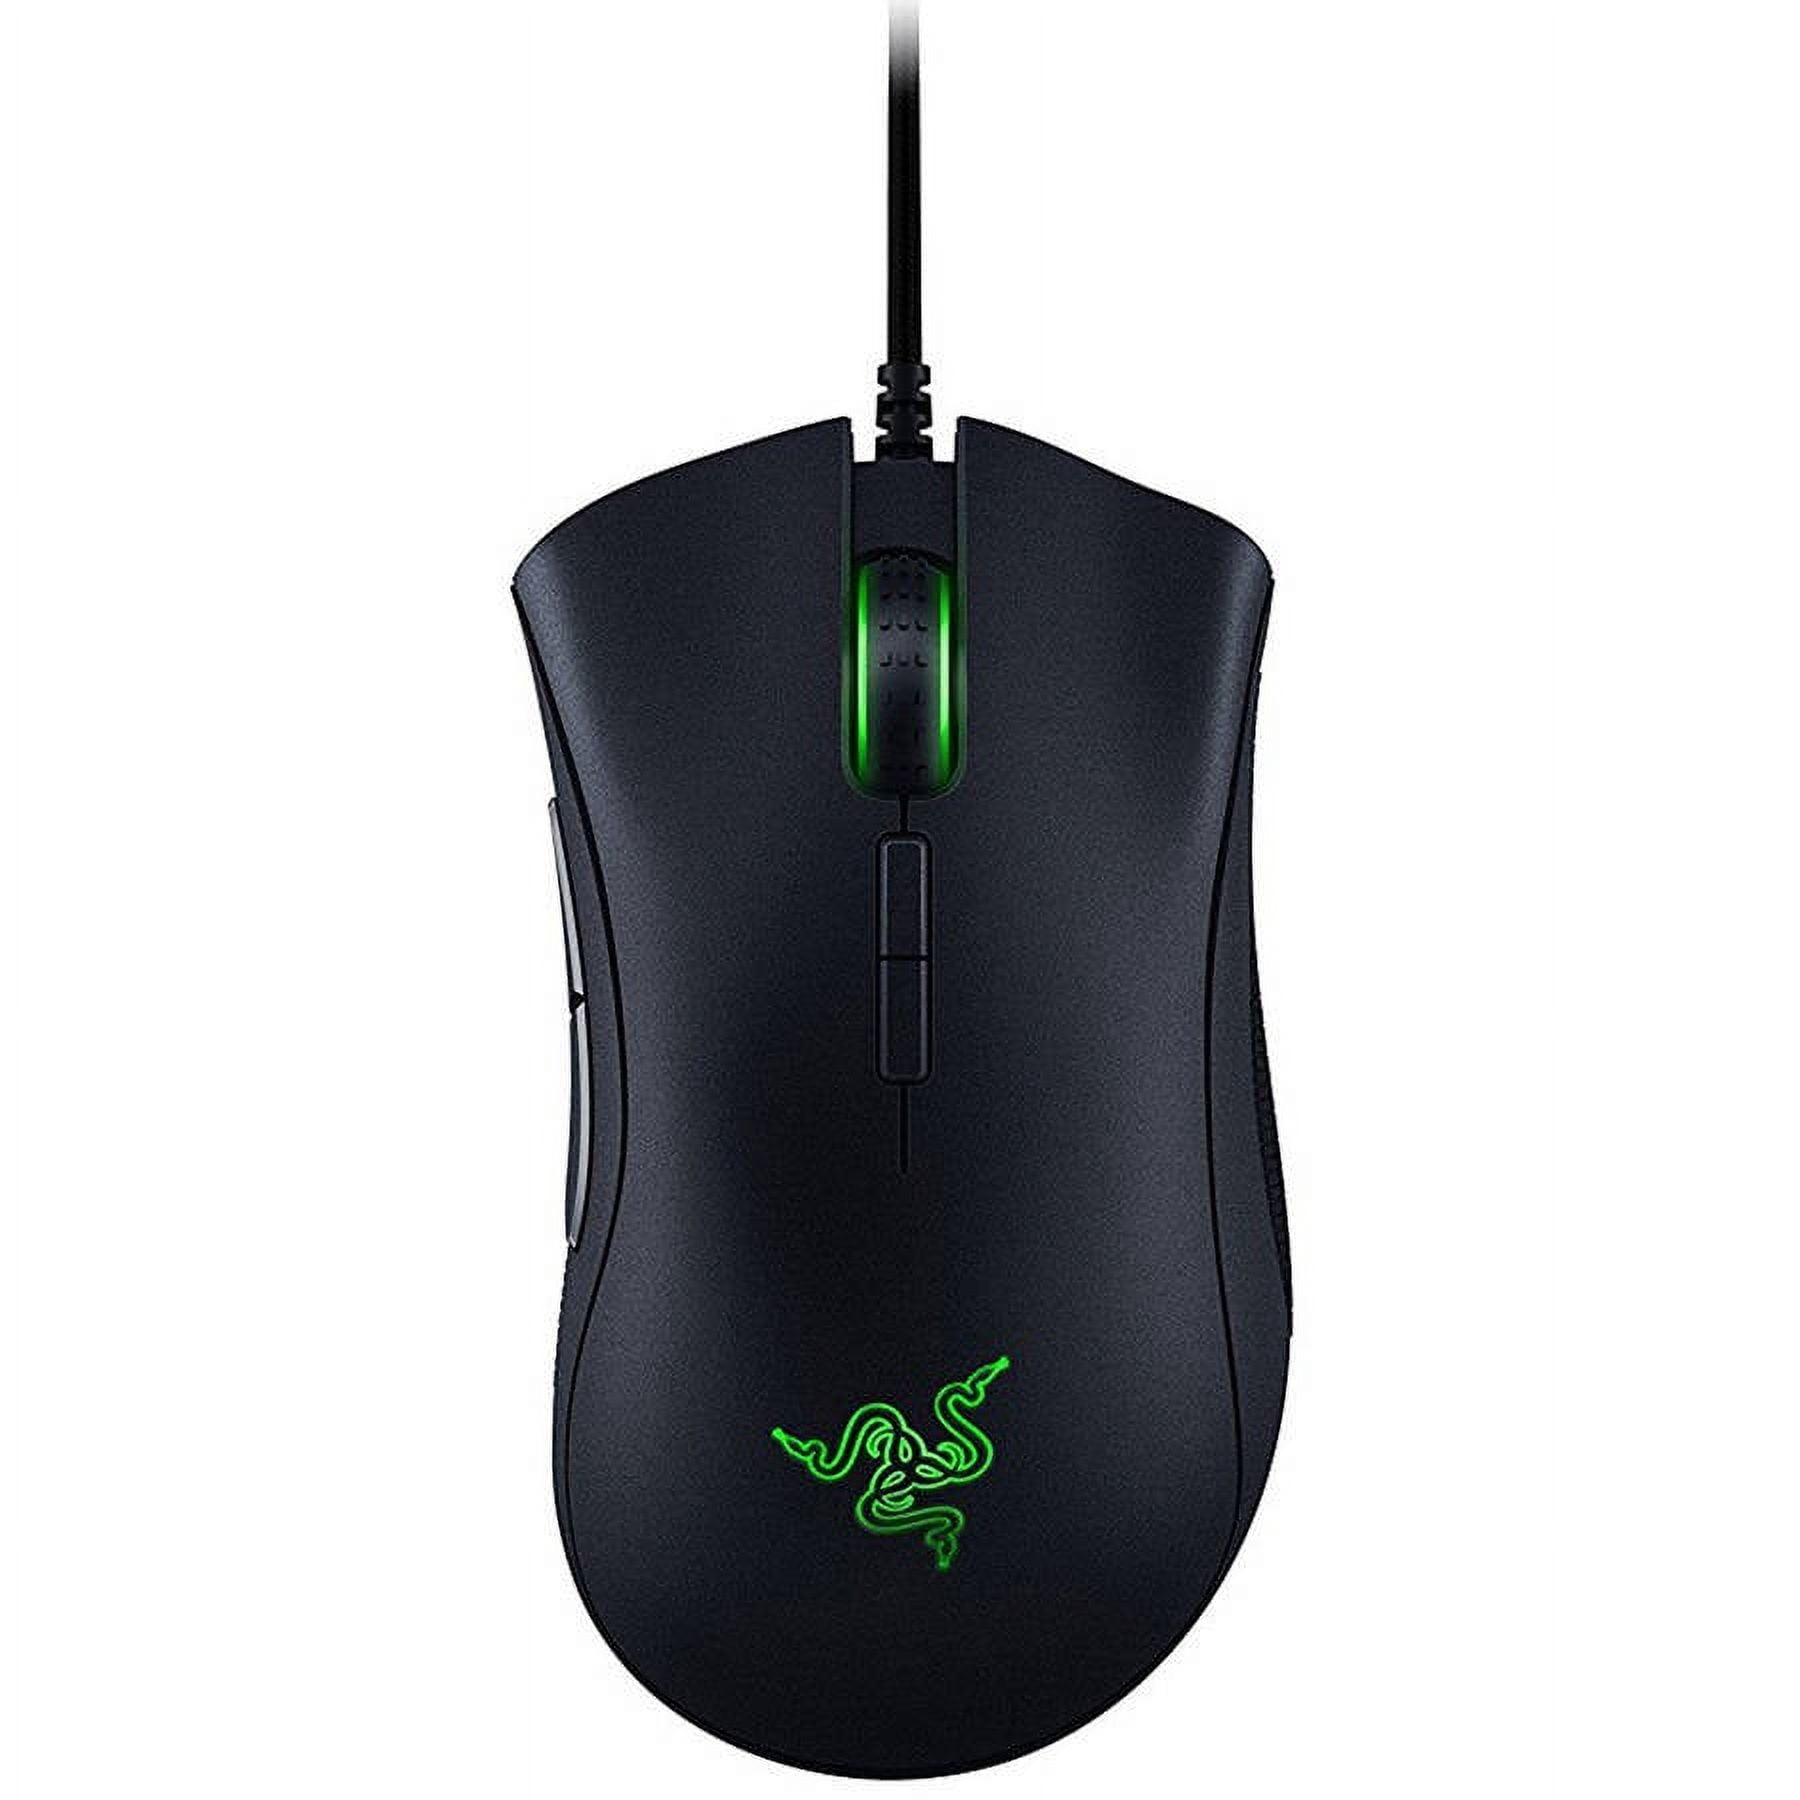 Auto clicker for Razer products : r/incremental_games